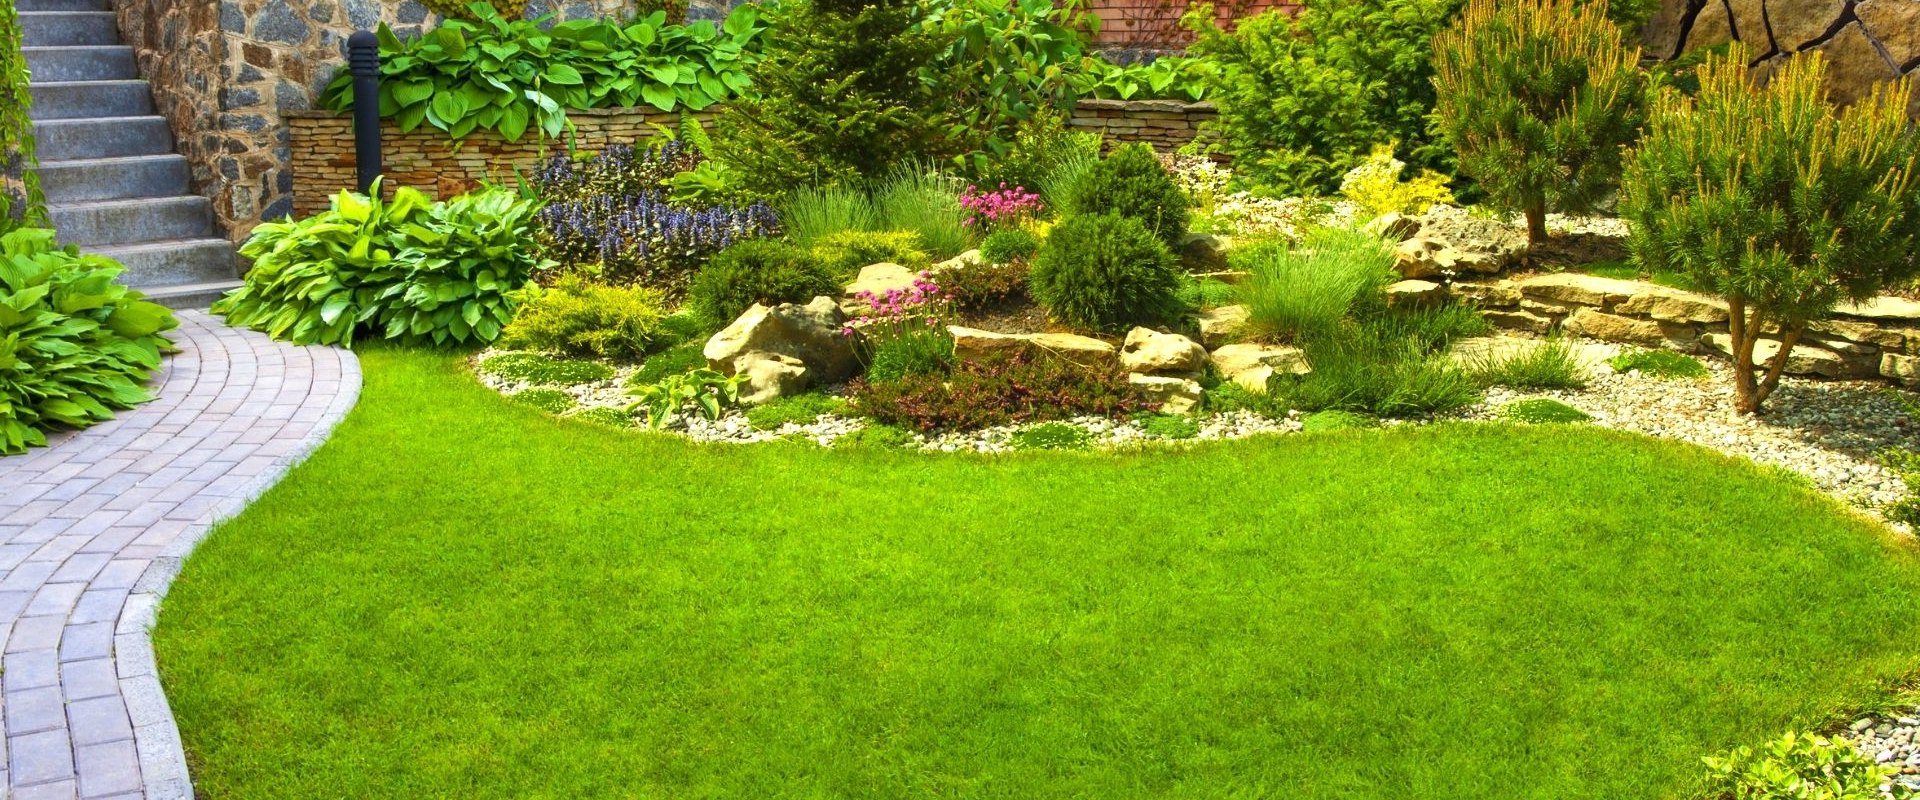 What are the types of services for landscaping?